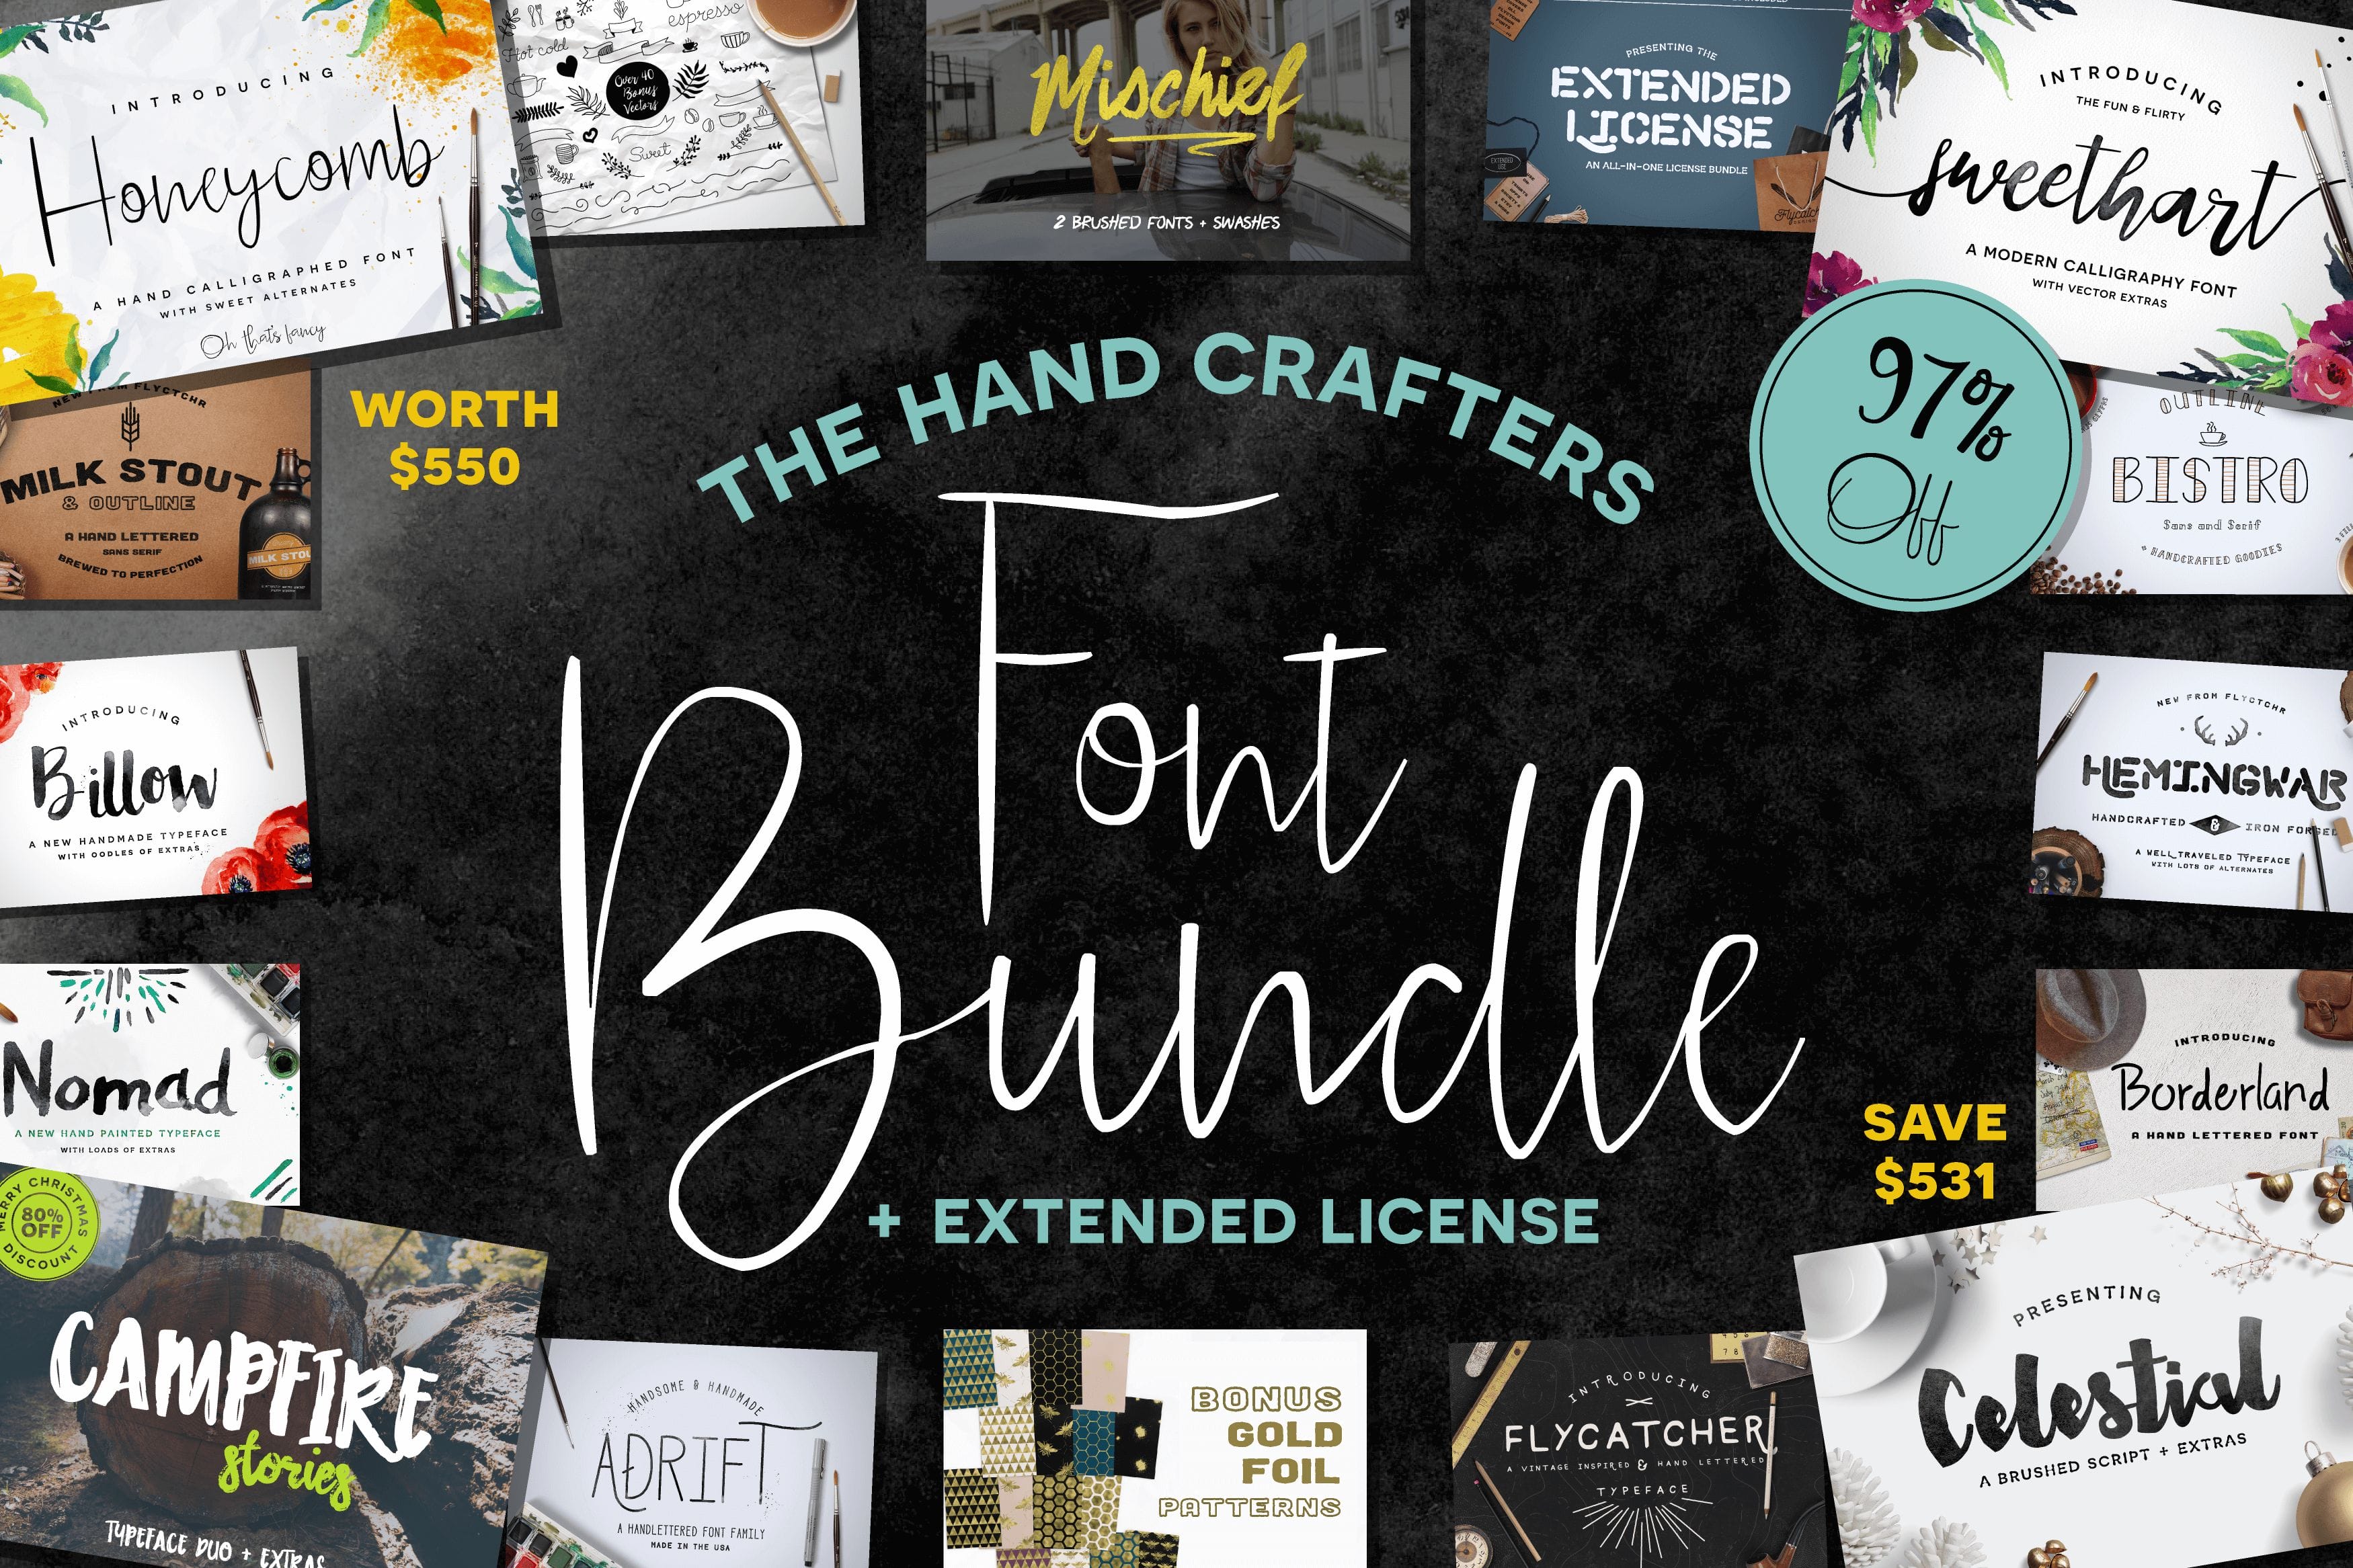 The Hand Crafters Font Bundle of 15 Premium Font Families + Extras - only $17!